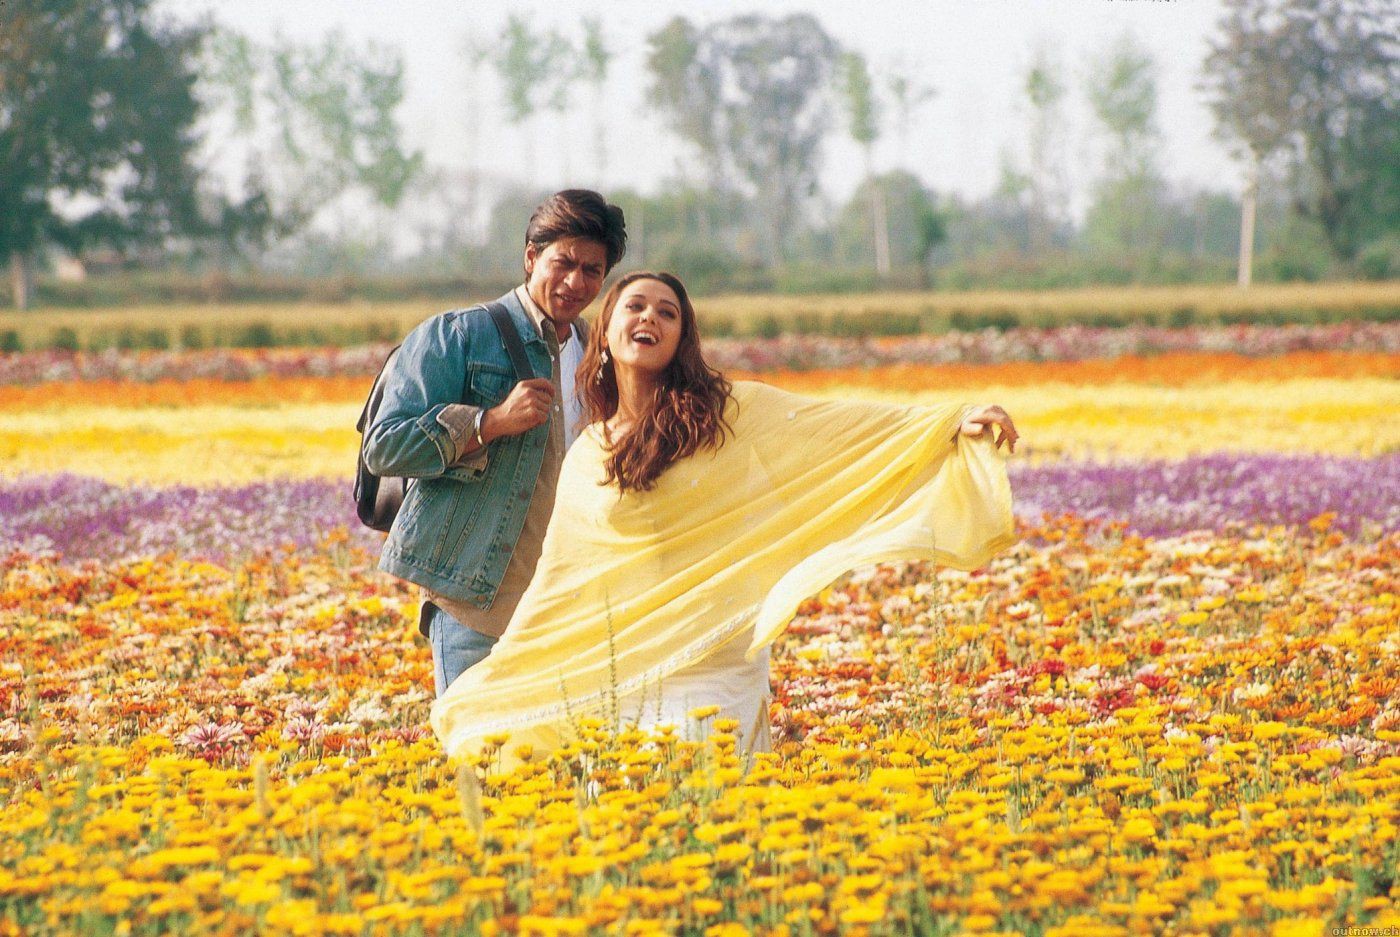 Veer (Shah Rukh Khan) and Zaara (Preity Zinta) stand in a field of yellow and pink flowers